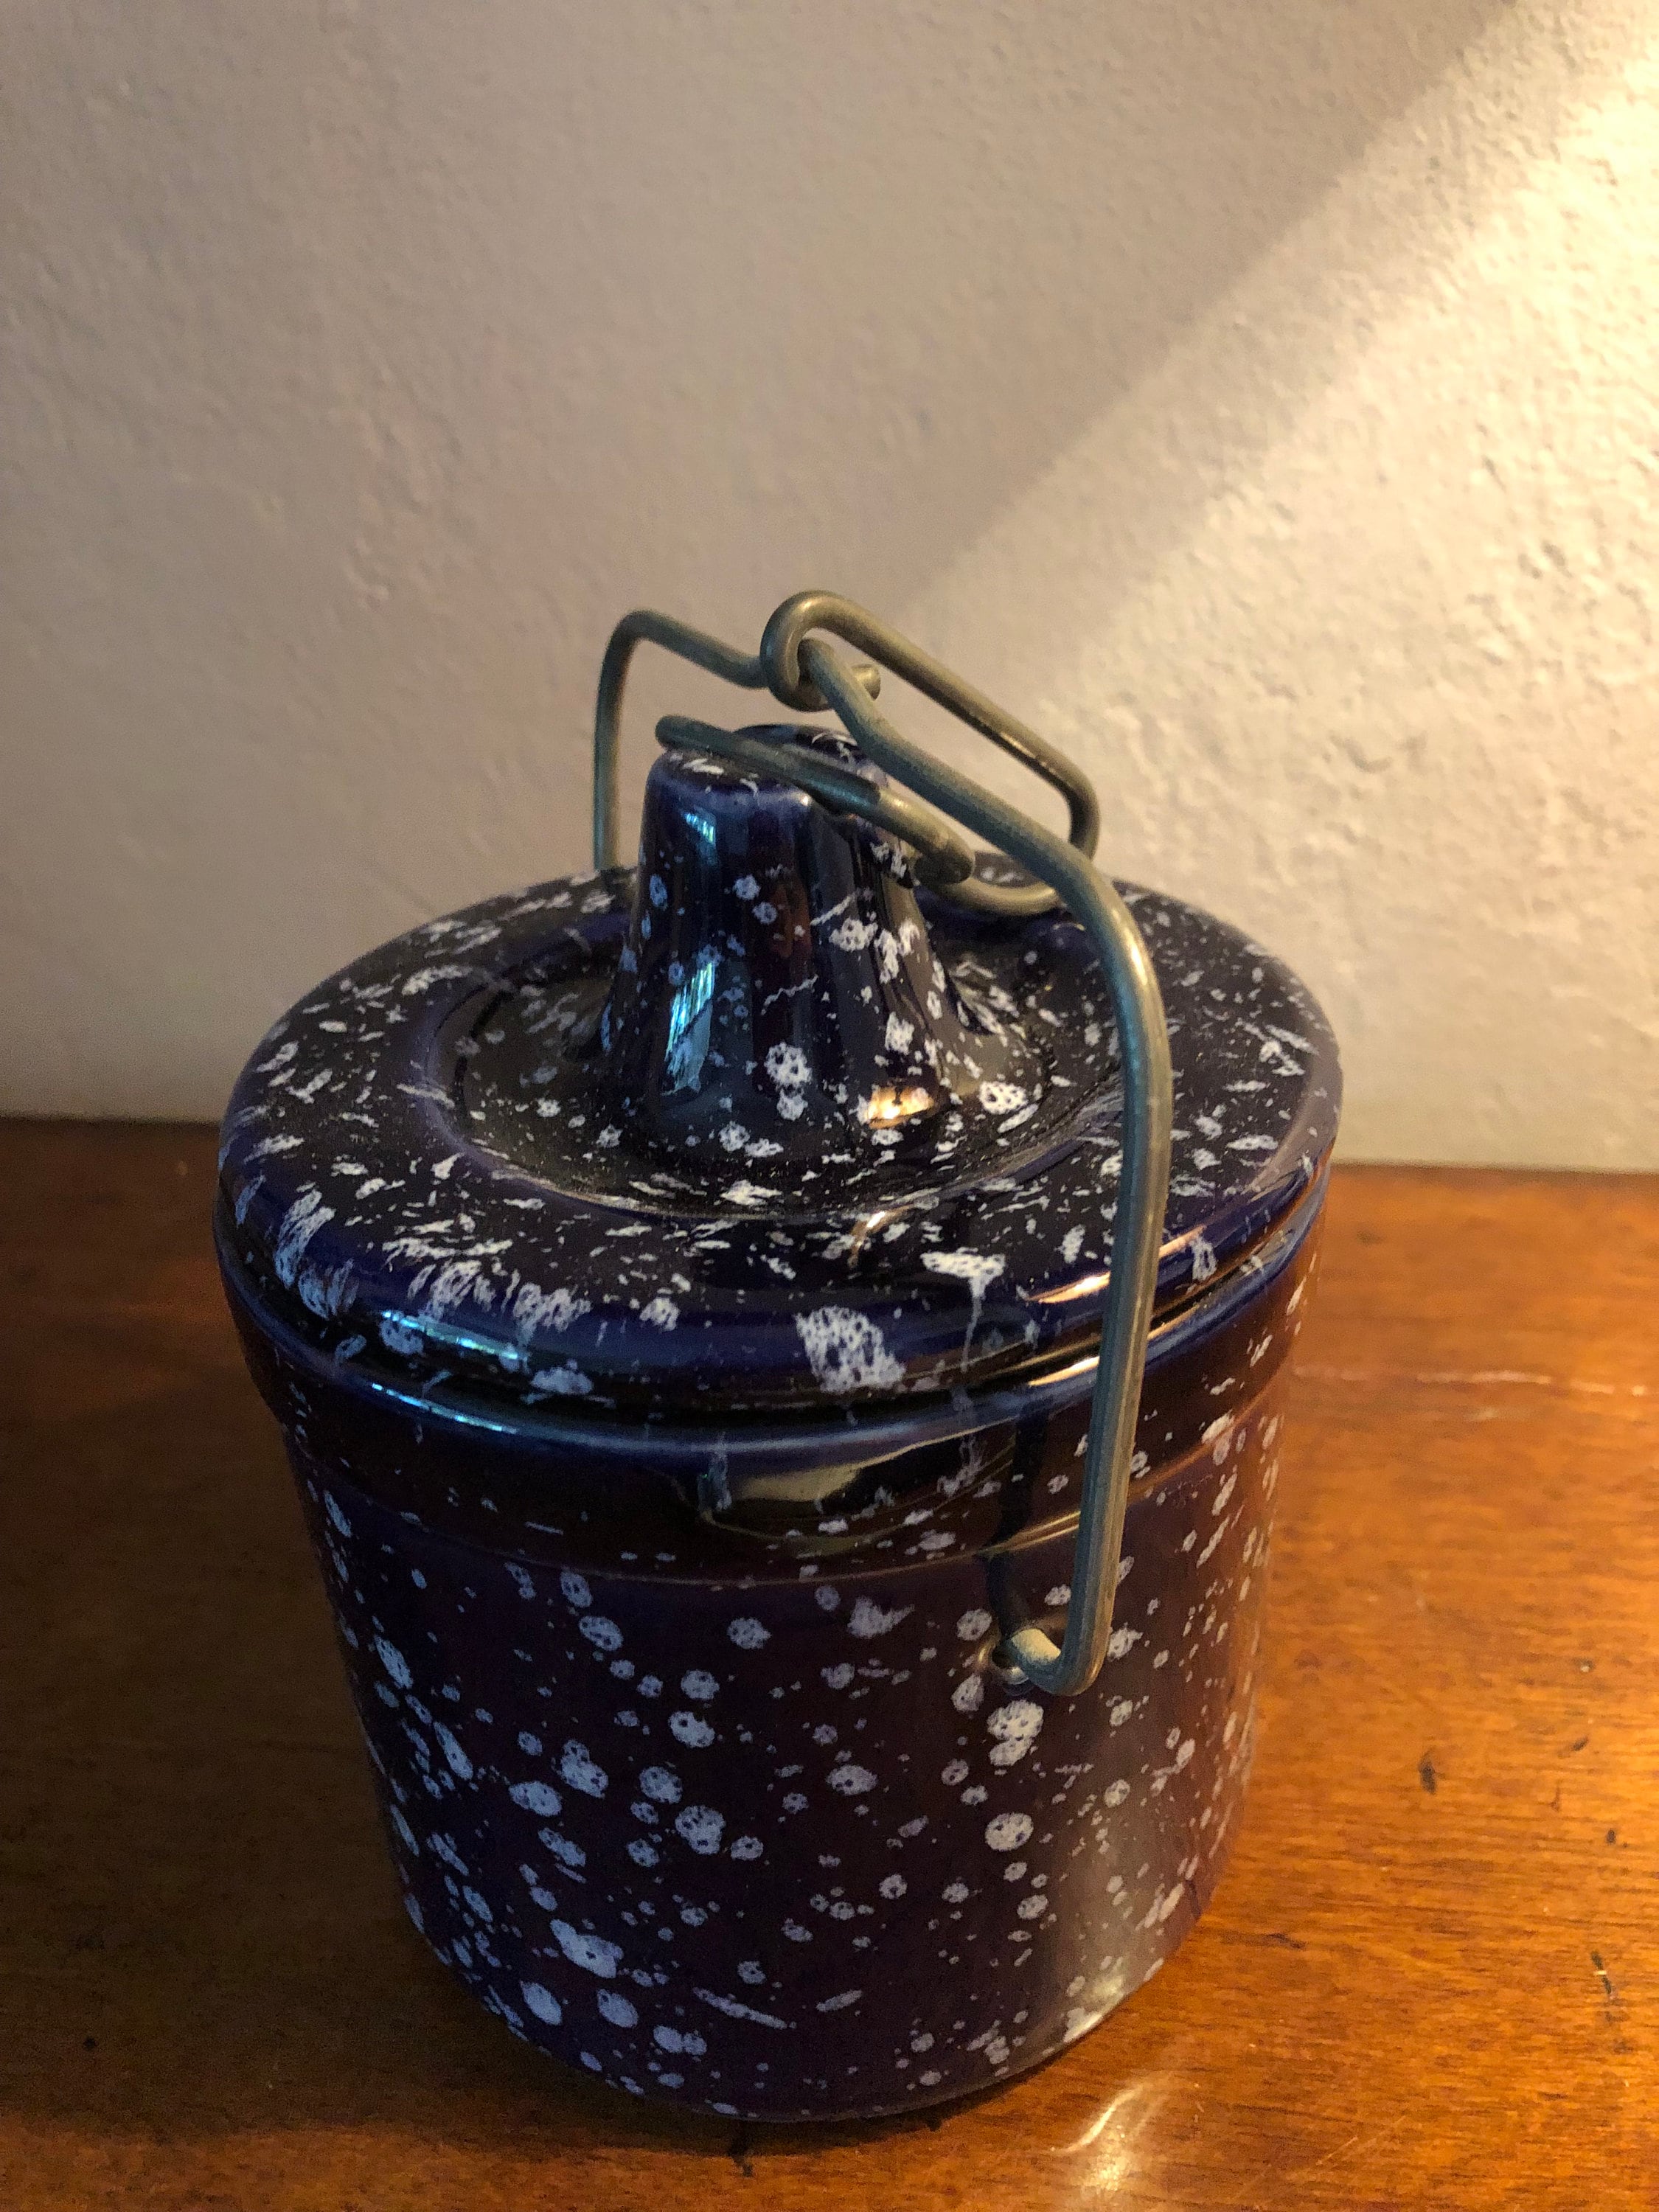 Green and Black French Butter Crock With Patterned Lid, Rustic Blue and  Black Butter Keeper 